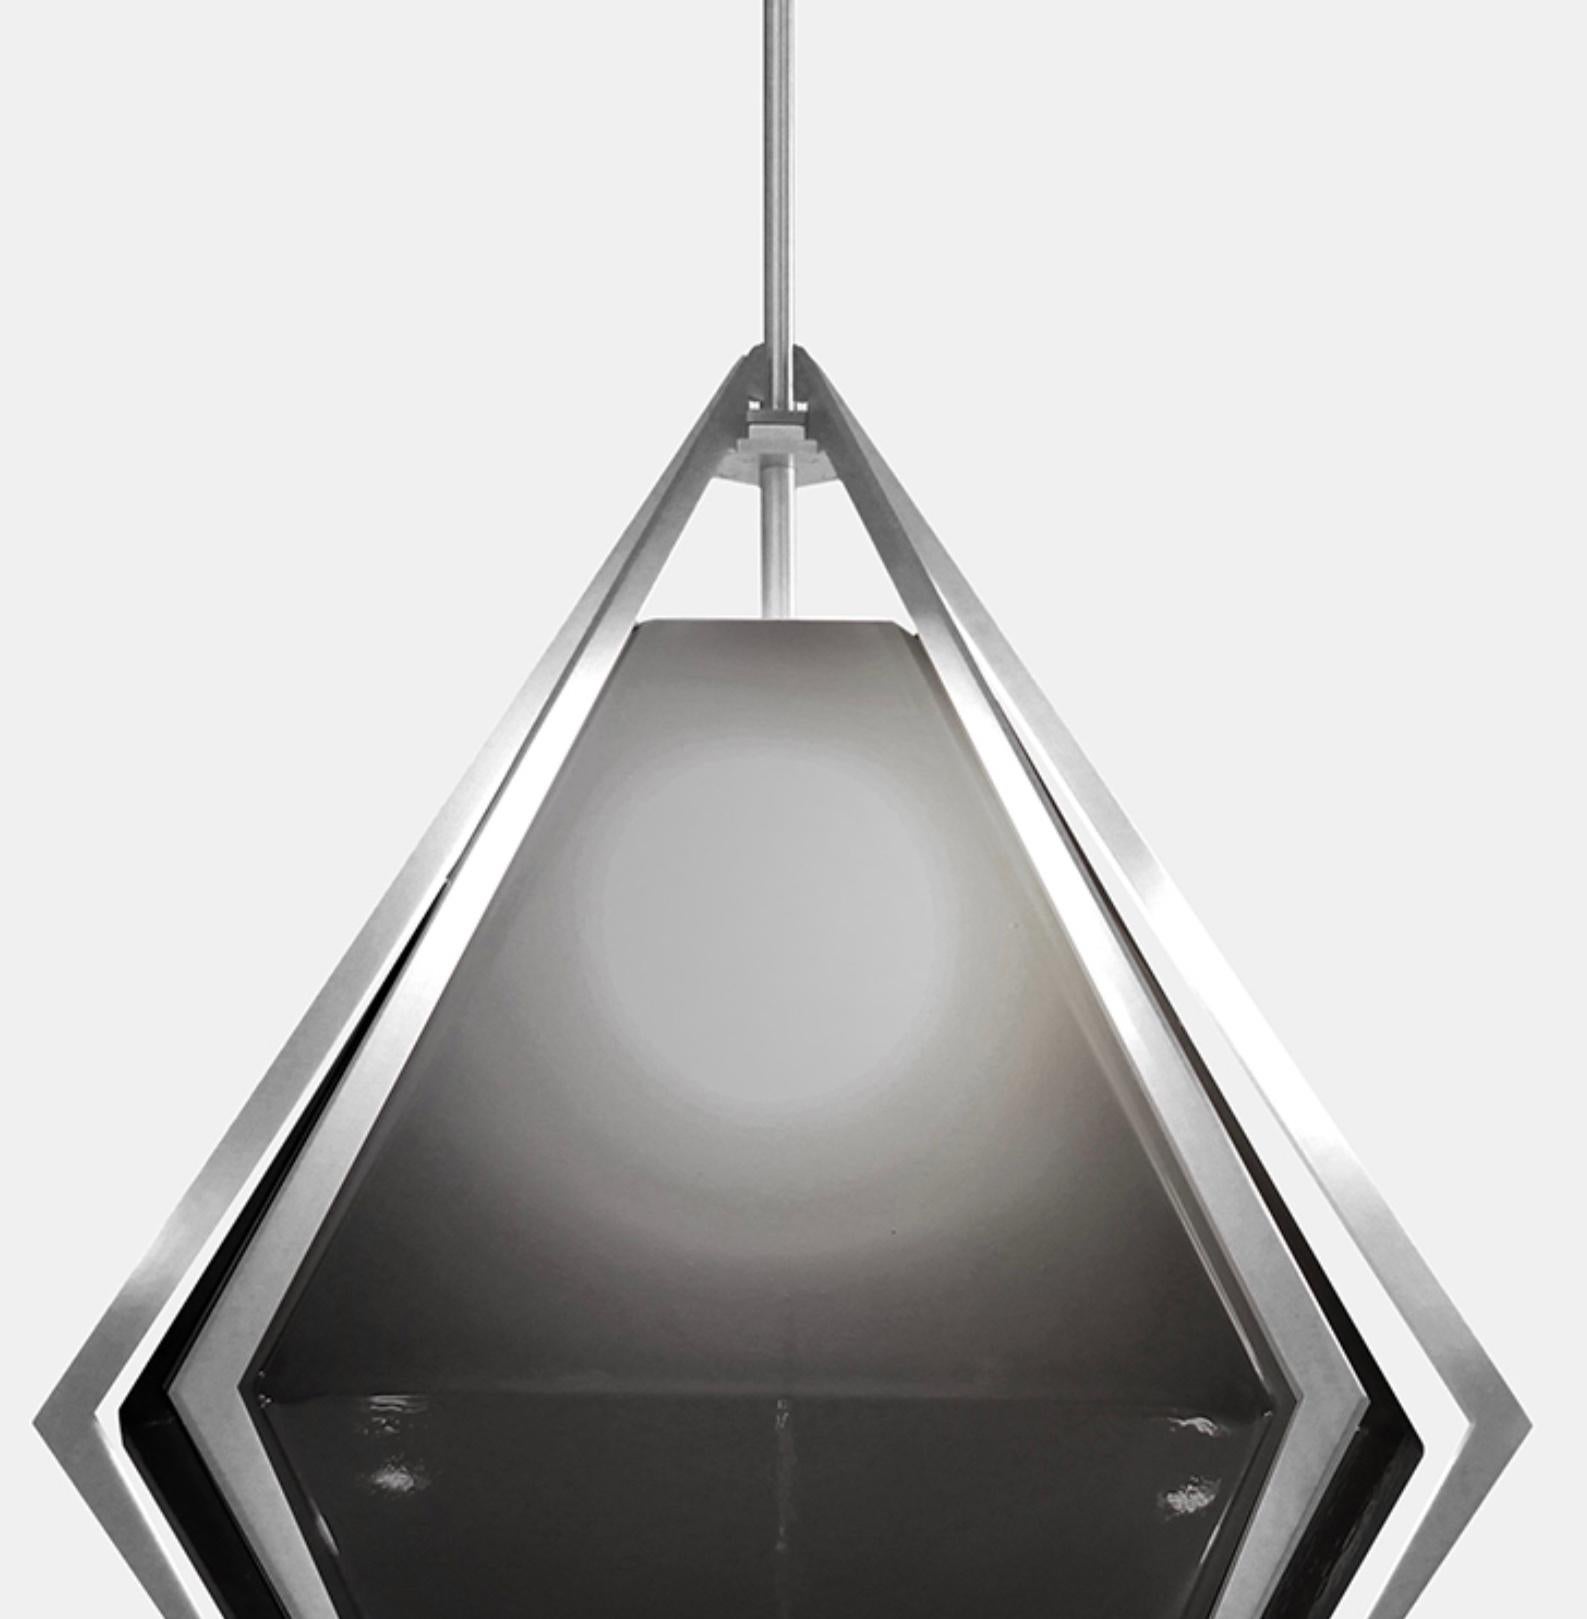 The Harlow Large Pendant offers an elegant starburst of light that reflects and refracts through its mold-blown glass shade. A sparkling prism, the Harlow Large Pendant is directly inspired by the world of jewelry with its metallic frame encasing a